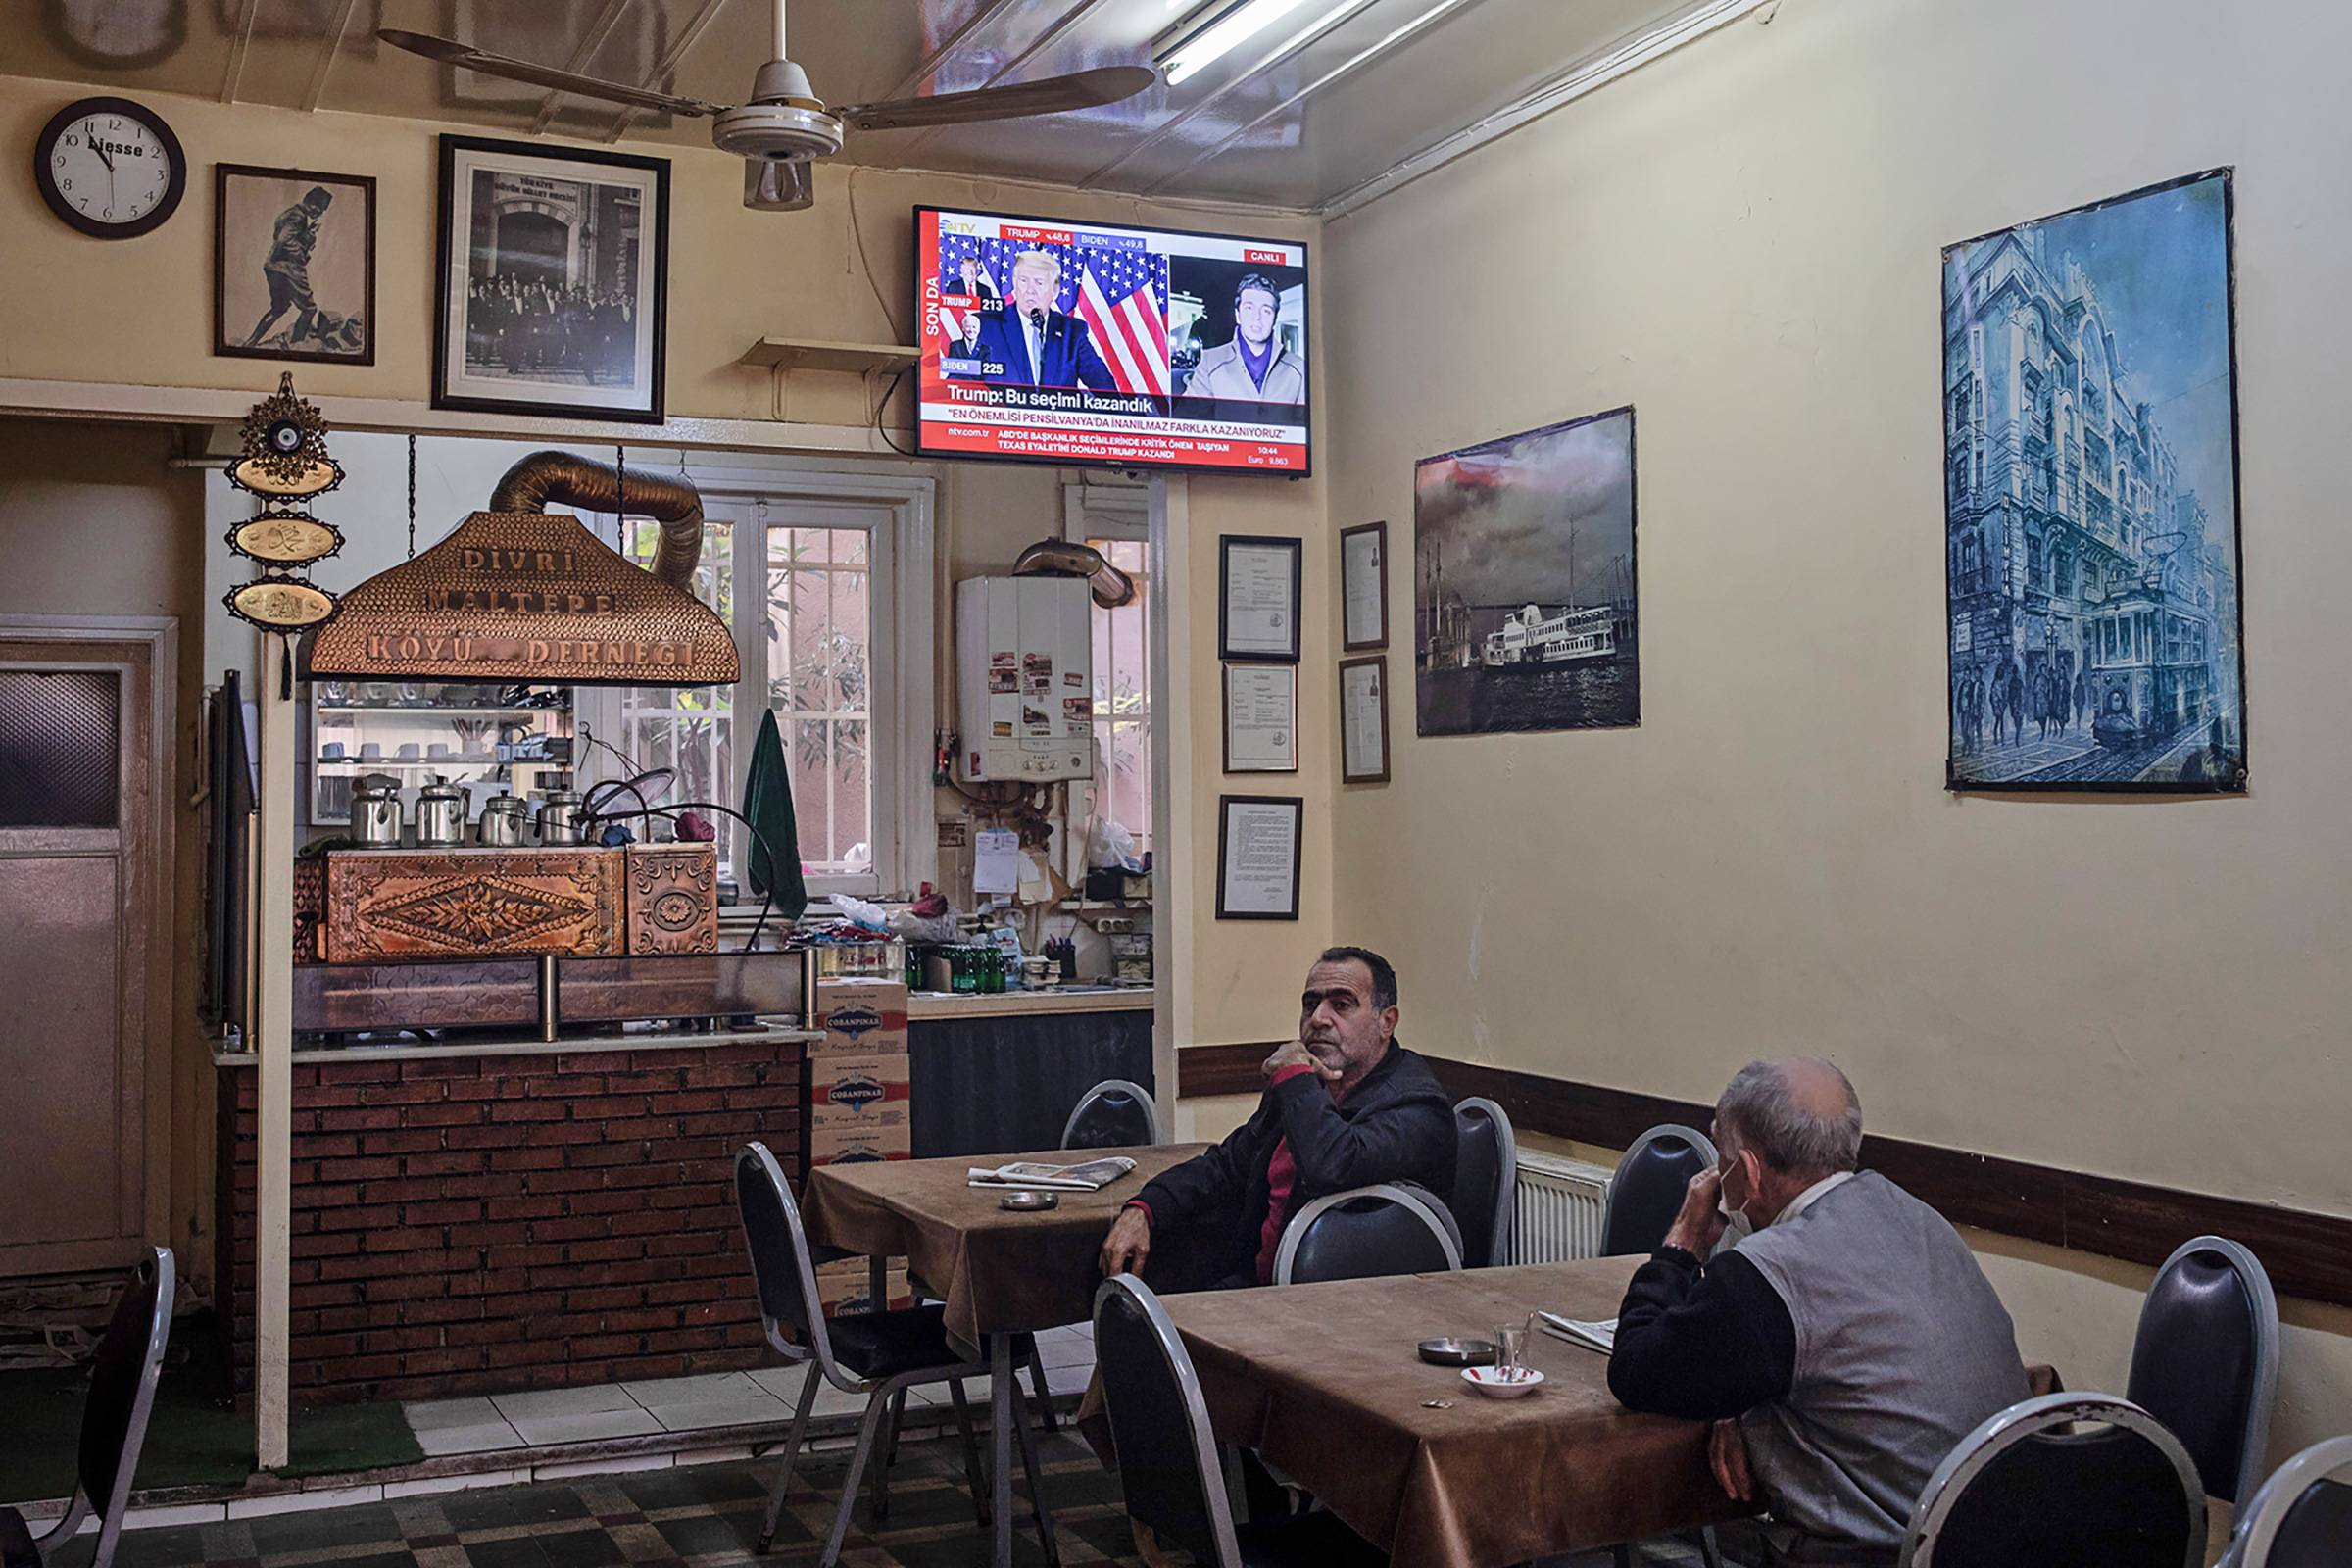 Tea drinkers in Istanbul watch one of President Trump’s press conferences (Nicole Tung—Bloomberg/Getty Images)